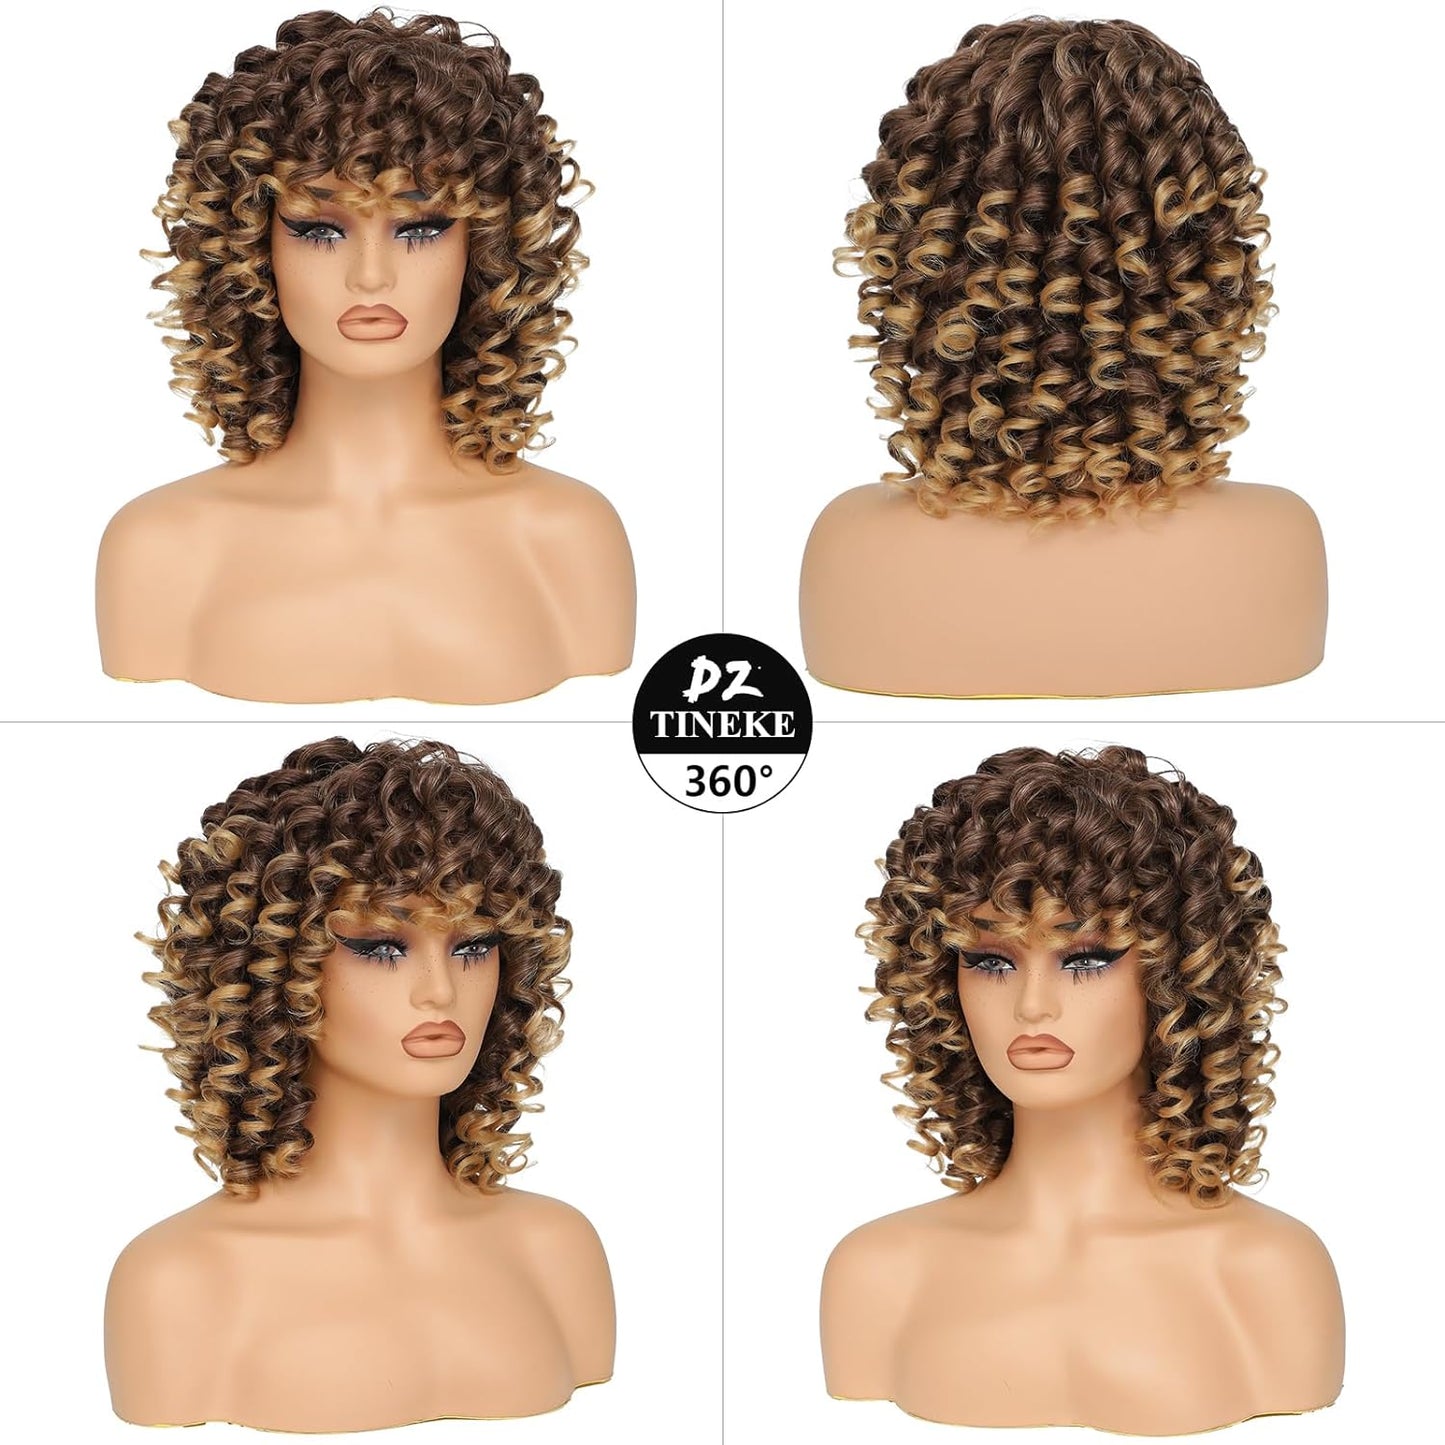 14 Inch Curly Wigs for Black Women Short Curly Wig with Bangs Big Loose Cute Kinky Curly Hair Synthetic Soft Wigs for Daily Party Cosplay (Black)